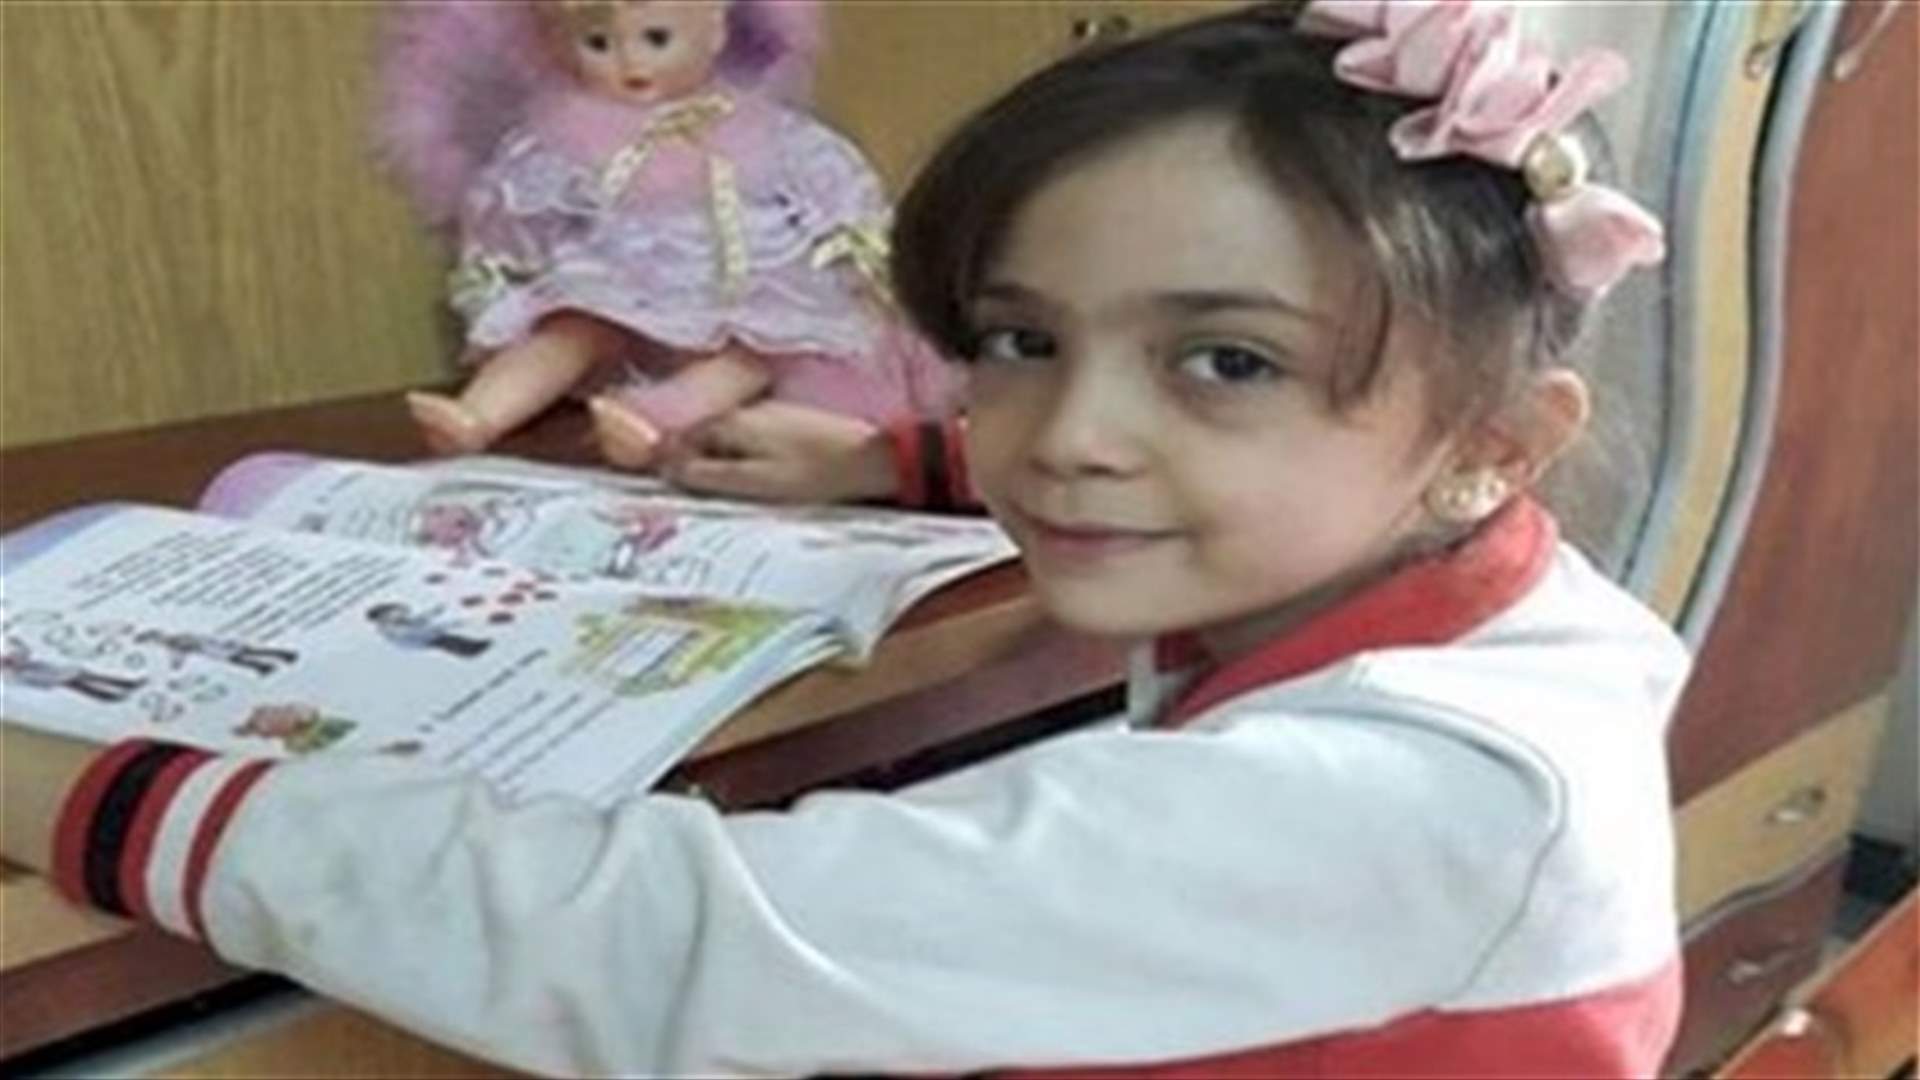 Account of Syrian girl who tweeted about Aleppo disappears online